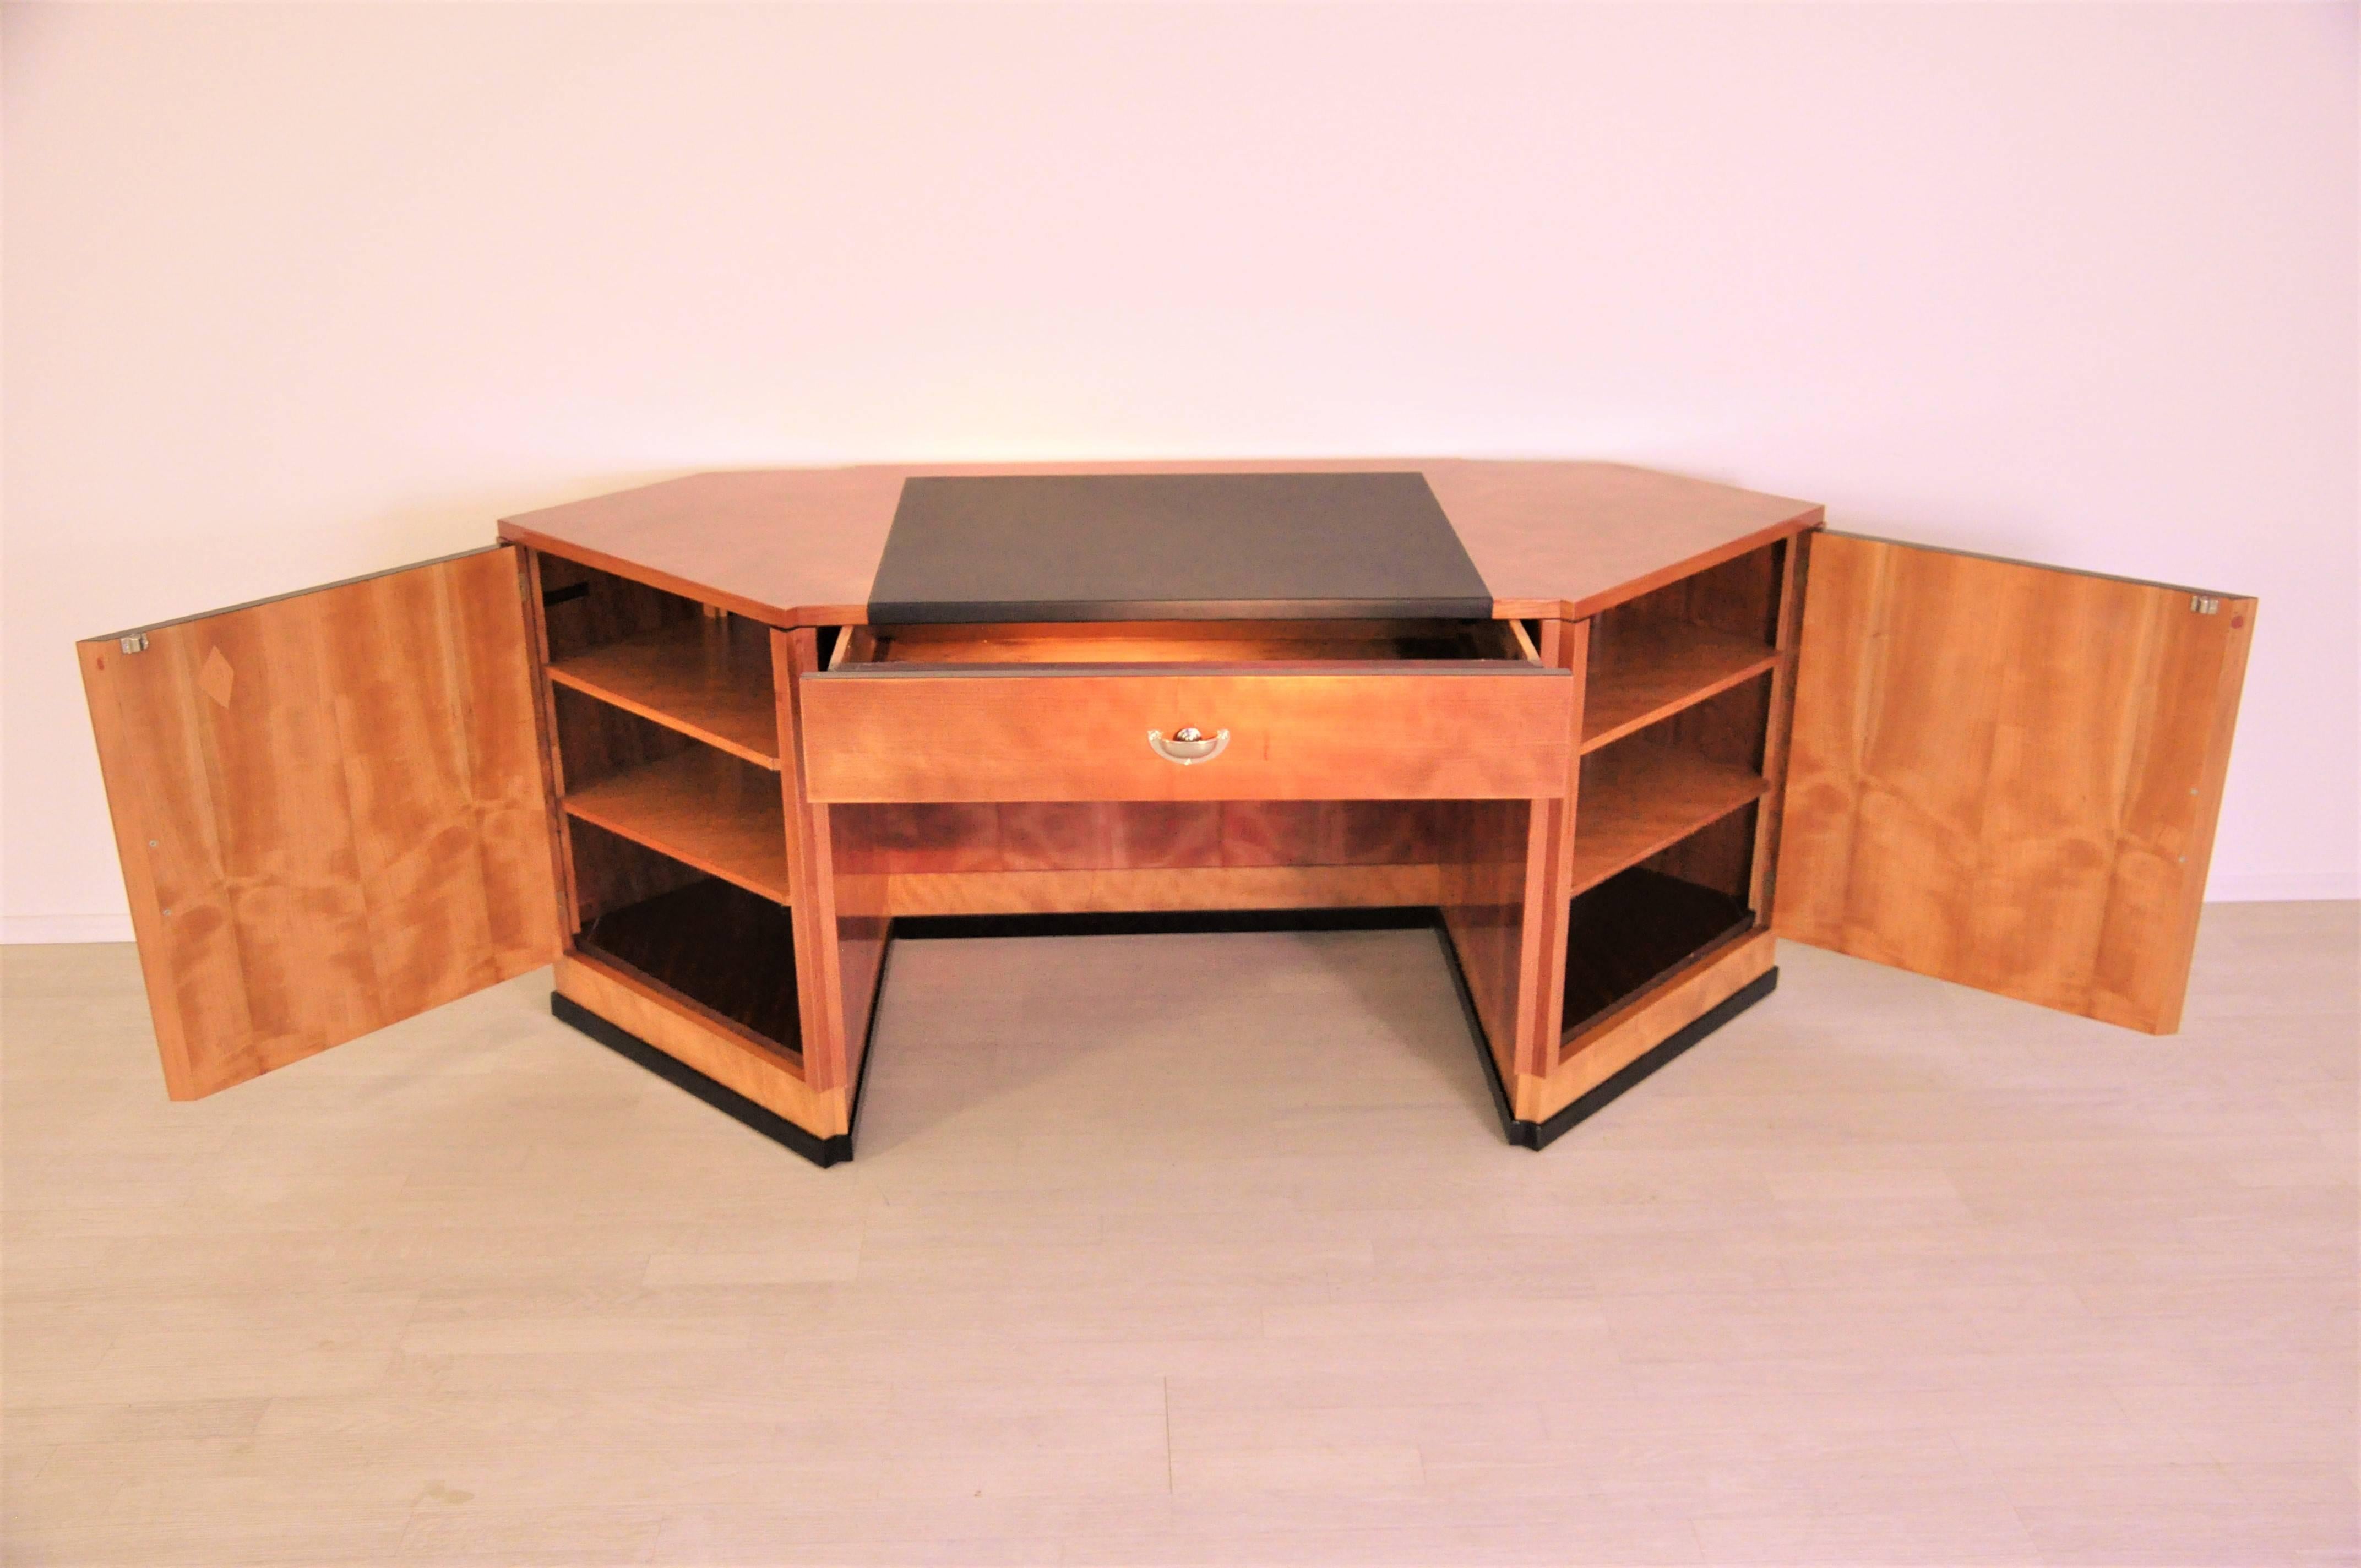 French Hexagonal Art Deco Desk Made of Cherry and Mahogany Wood For Sale